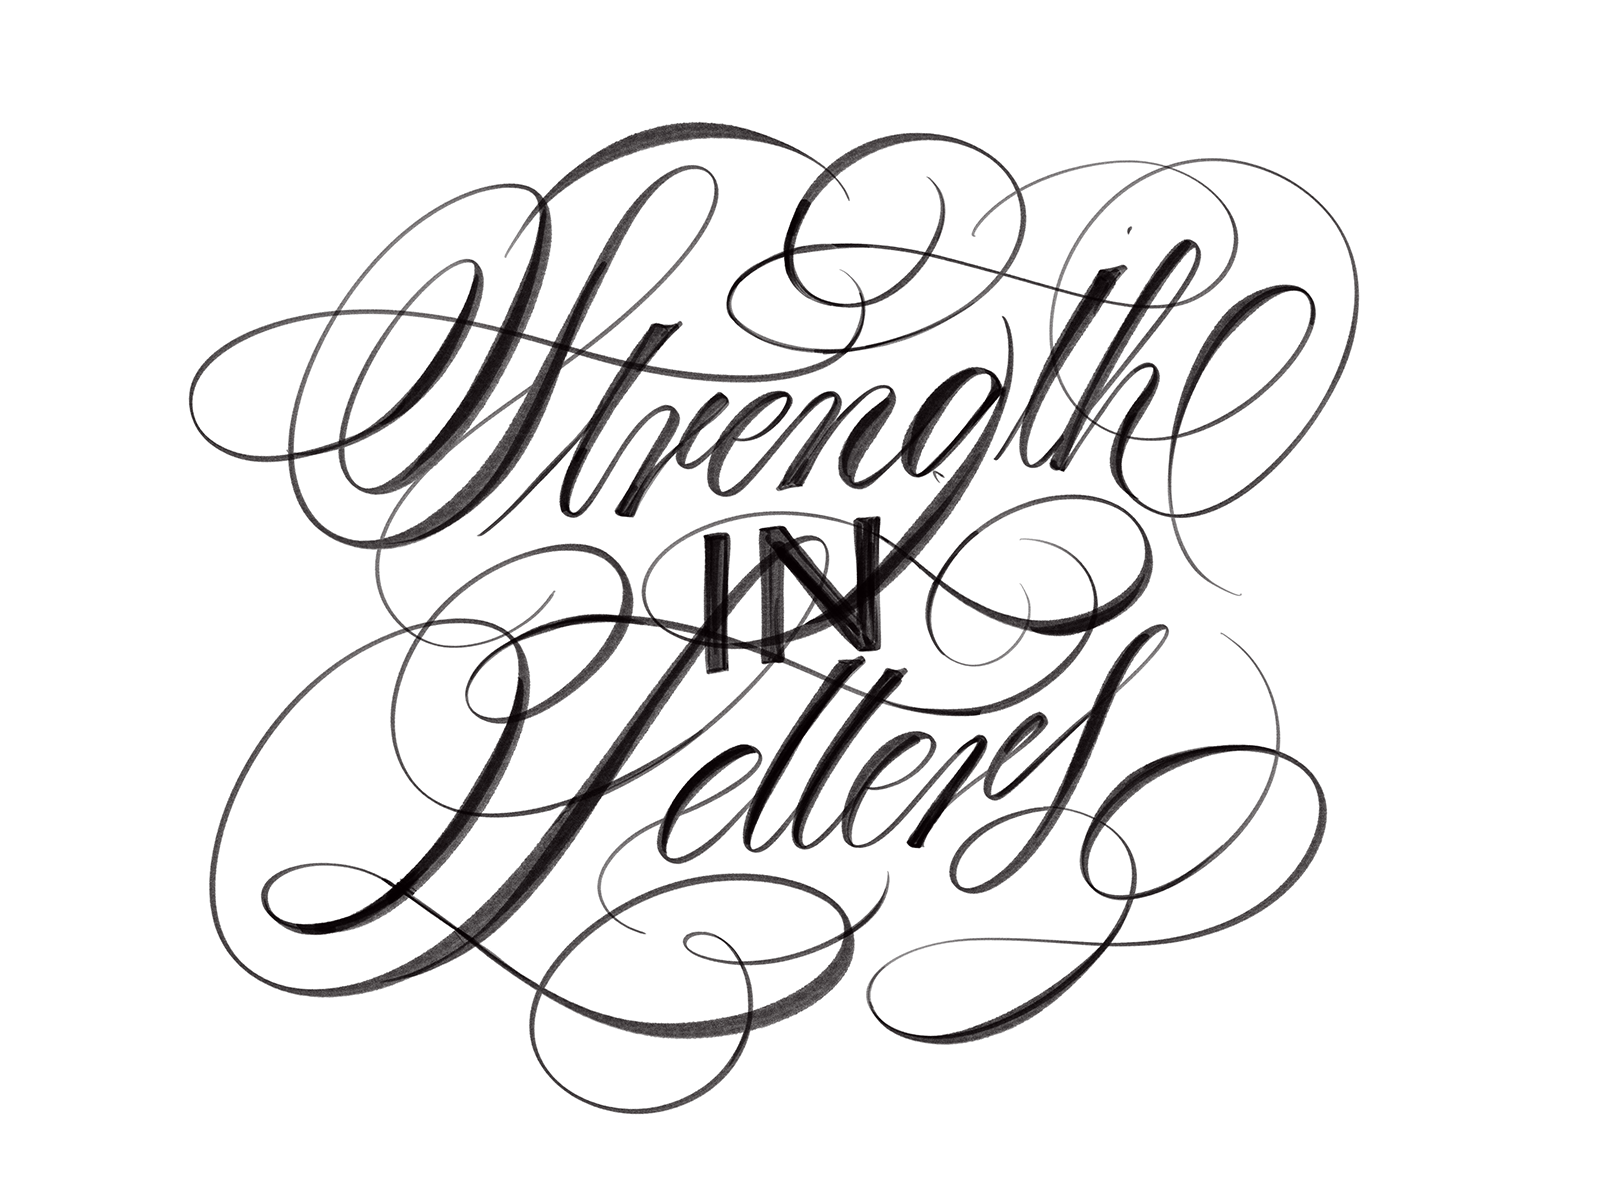 Strength In Letters by Michael Moodie on Dribbble